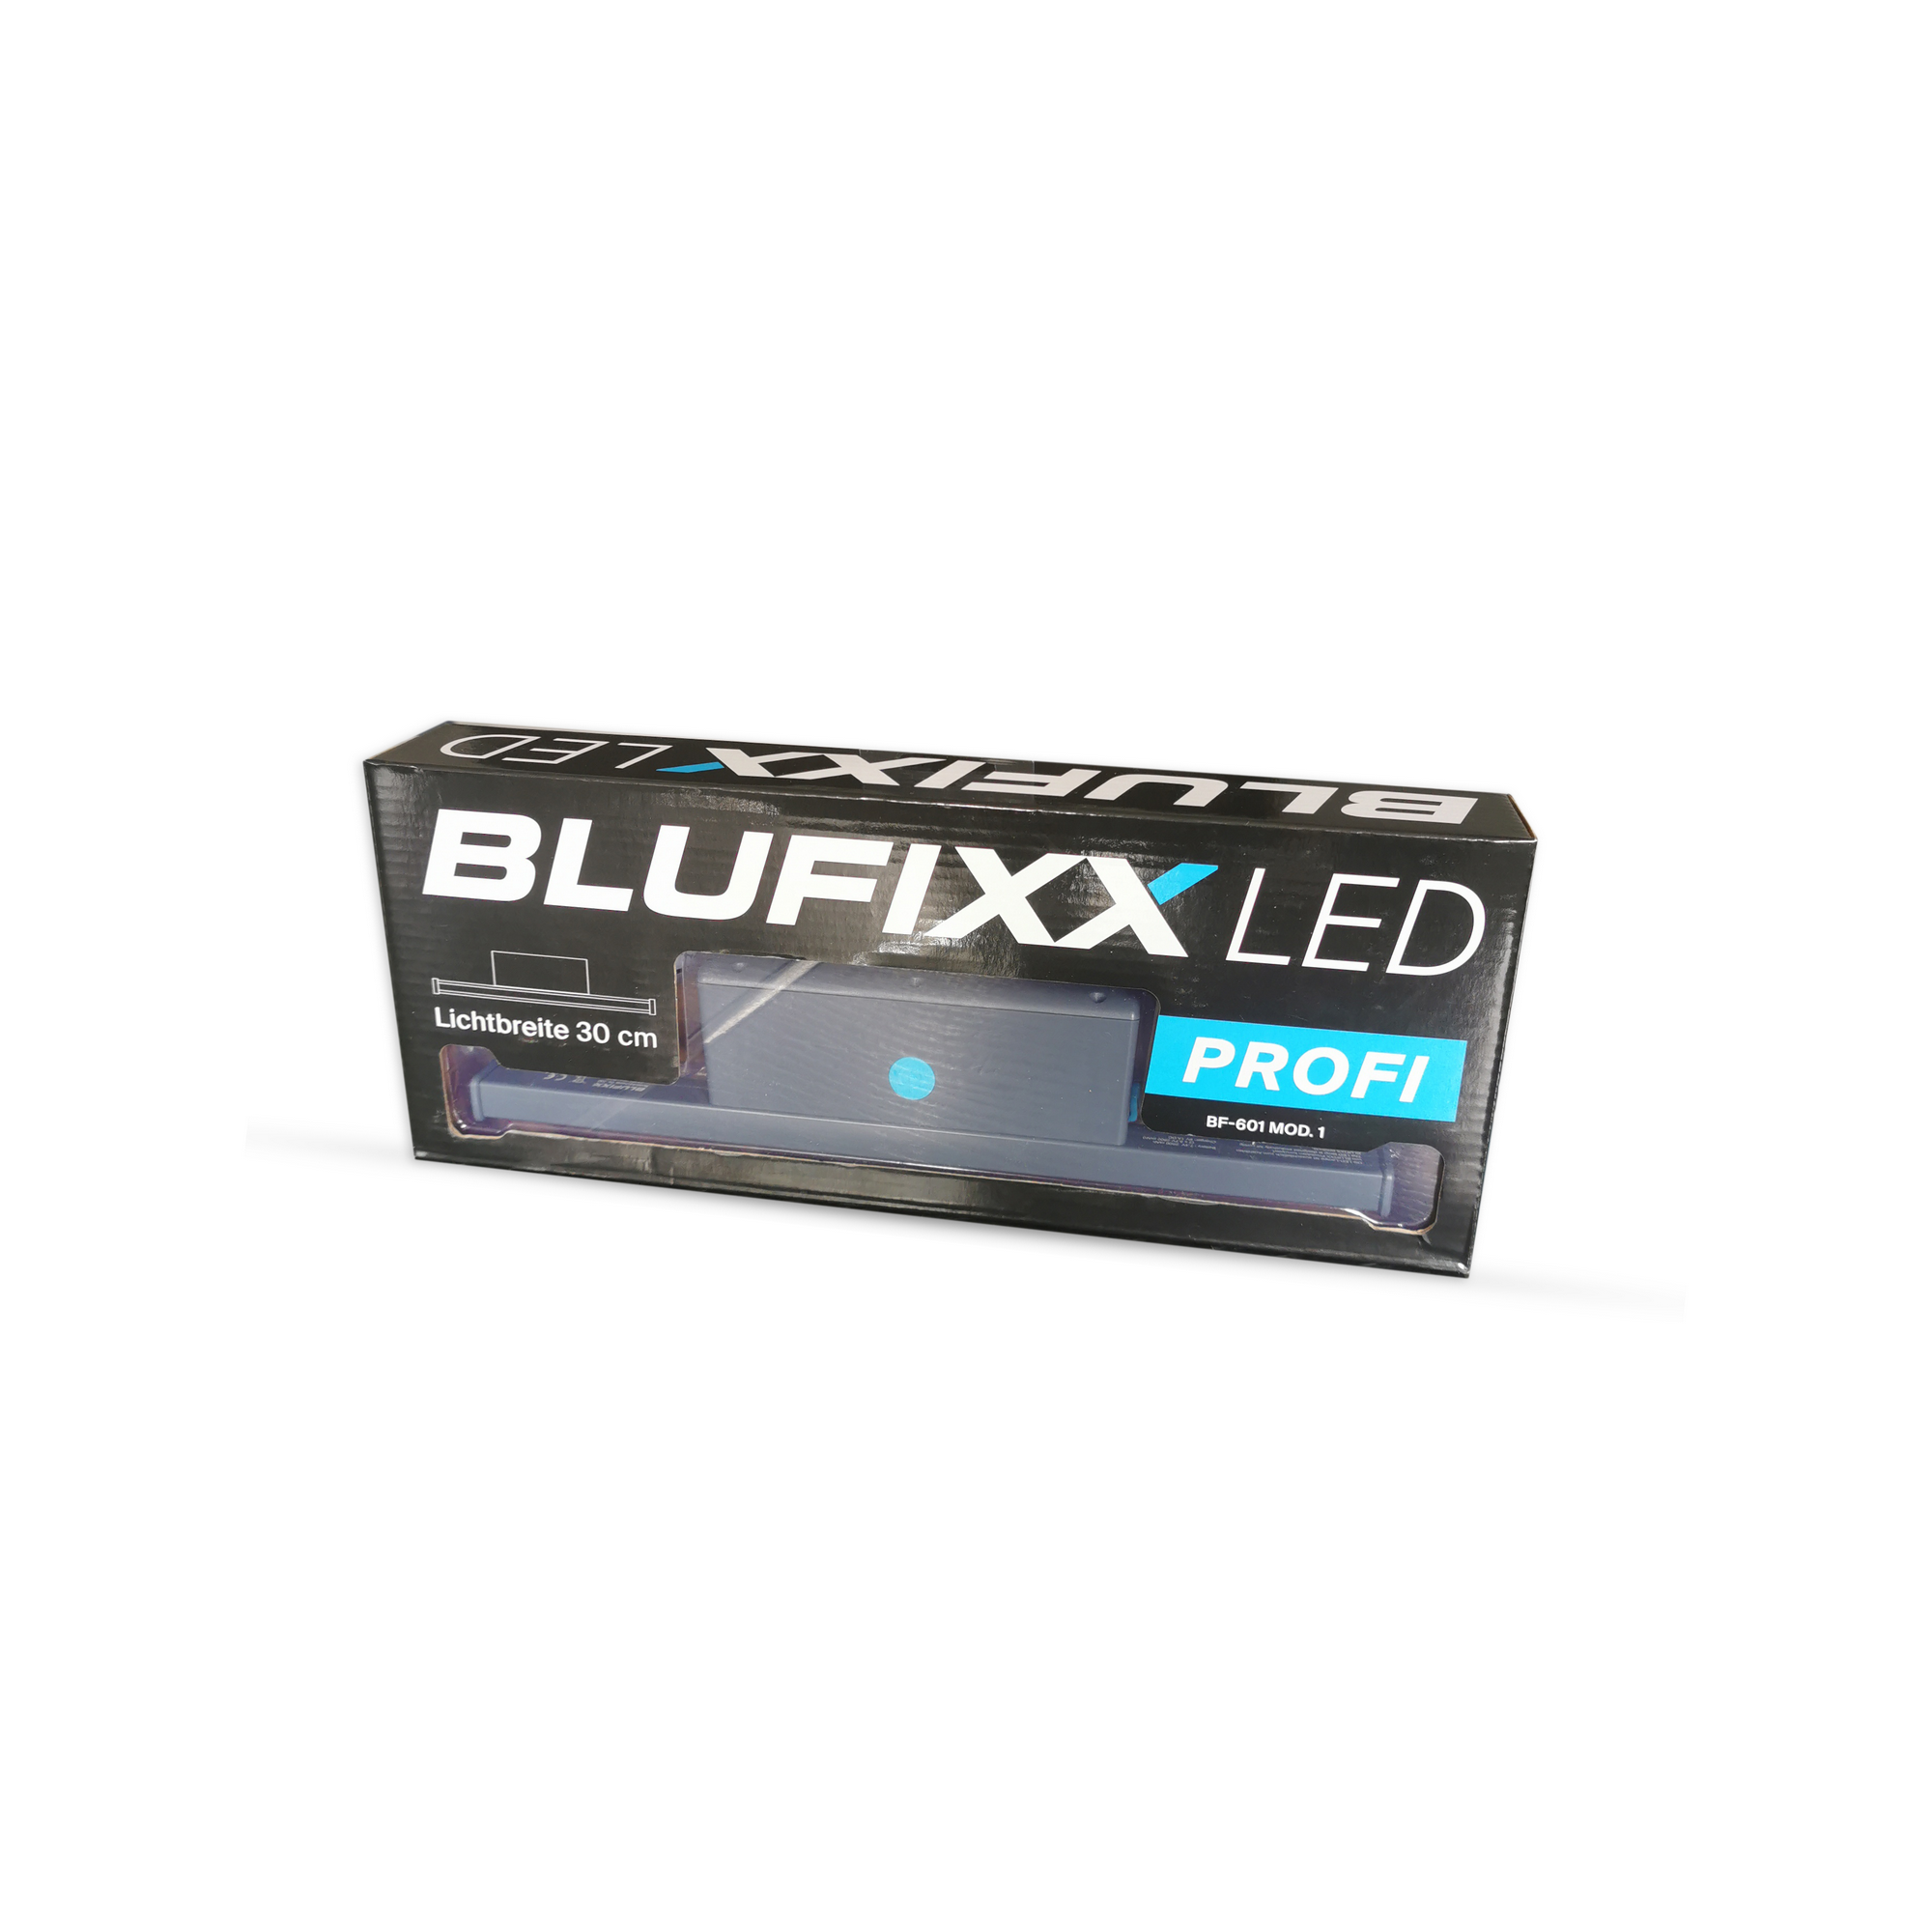 Blufixx LED inkl. Batterie + product picture